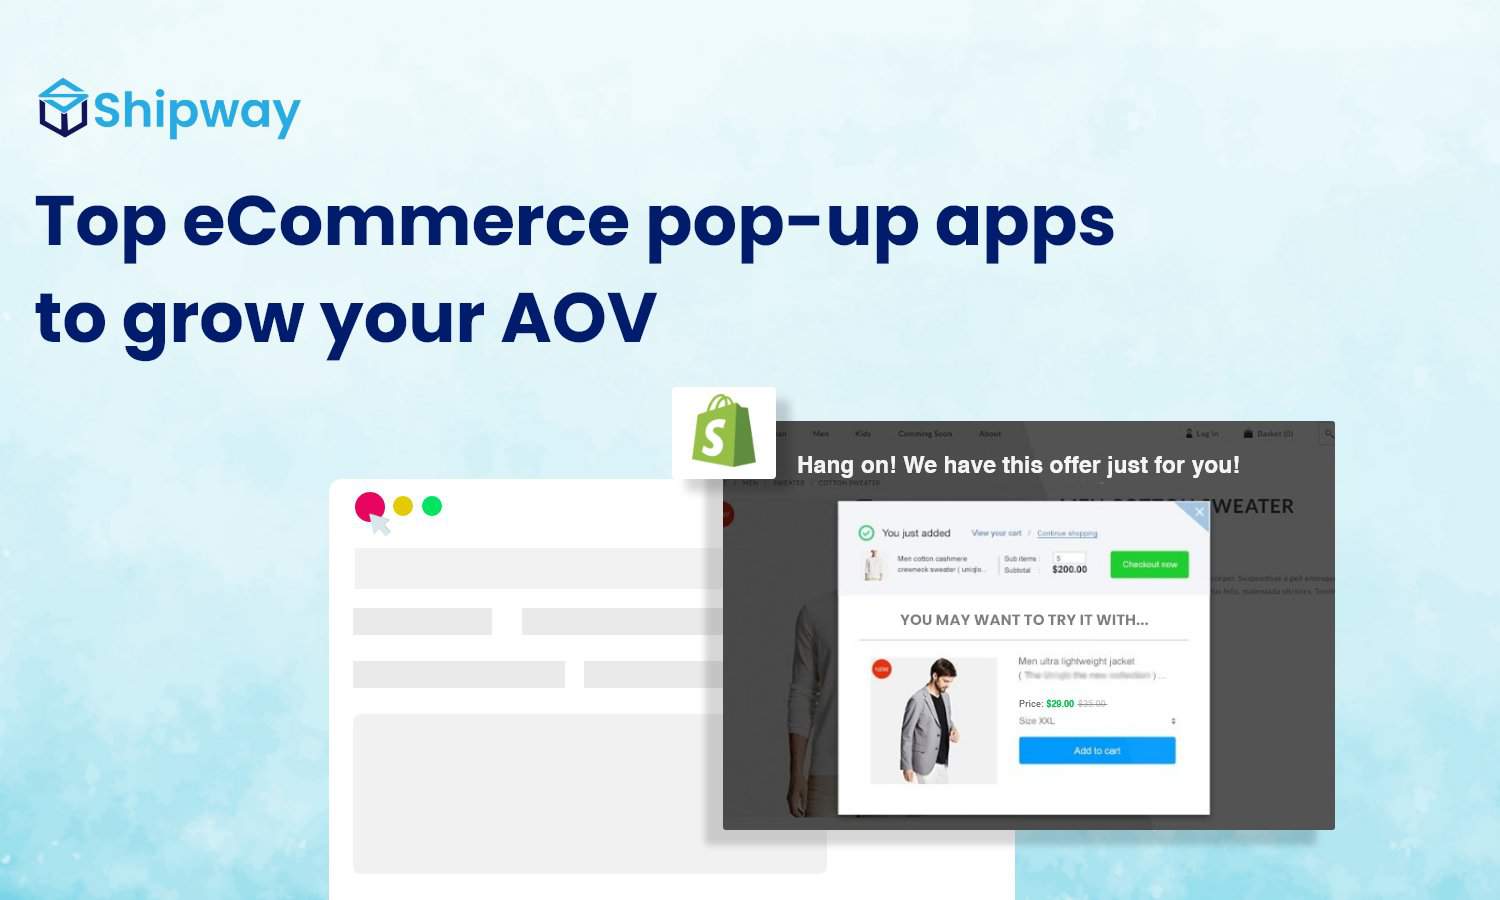 Top 7 eCommerce pop-up apps to grow your AOV